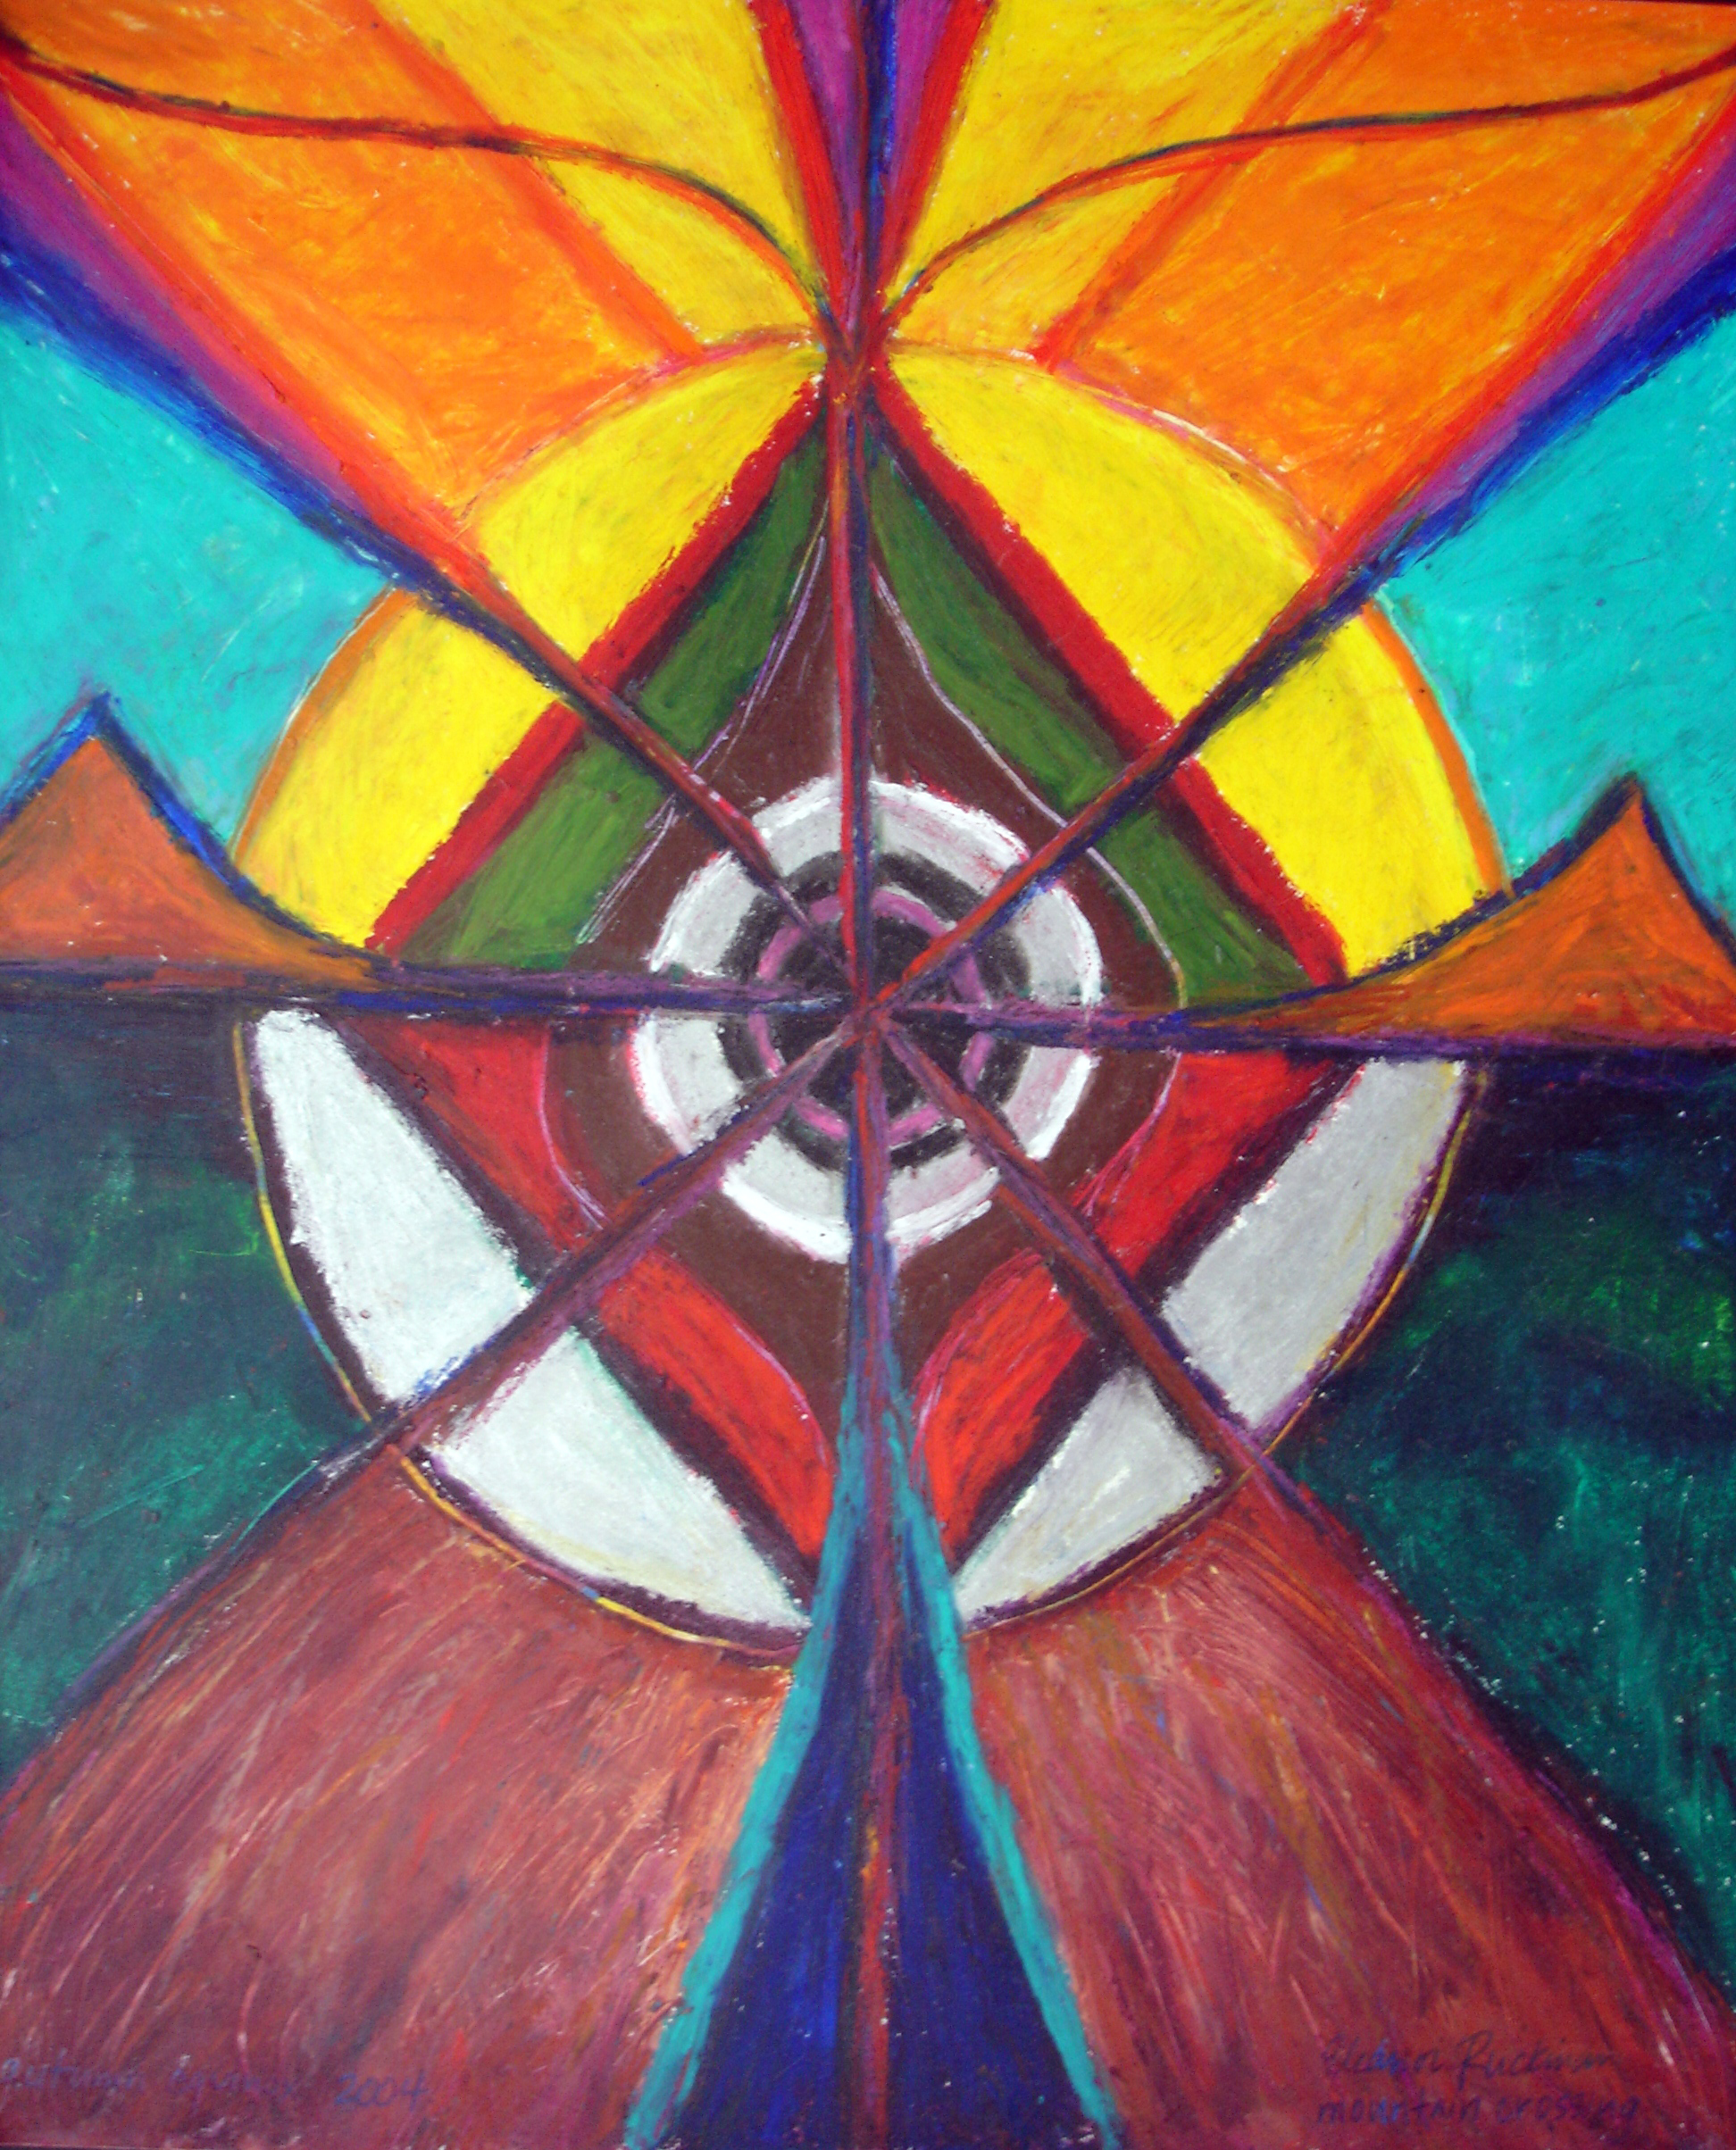 Mountain Crossing, Fall 2004
Oil pastel on paper, 17”h x 13.5”w, Eleanor Ruckman

Created during Meinrad Craighead’s art and ritual retreat, Albuquerque, New Mexico. 
